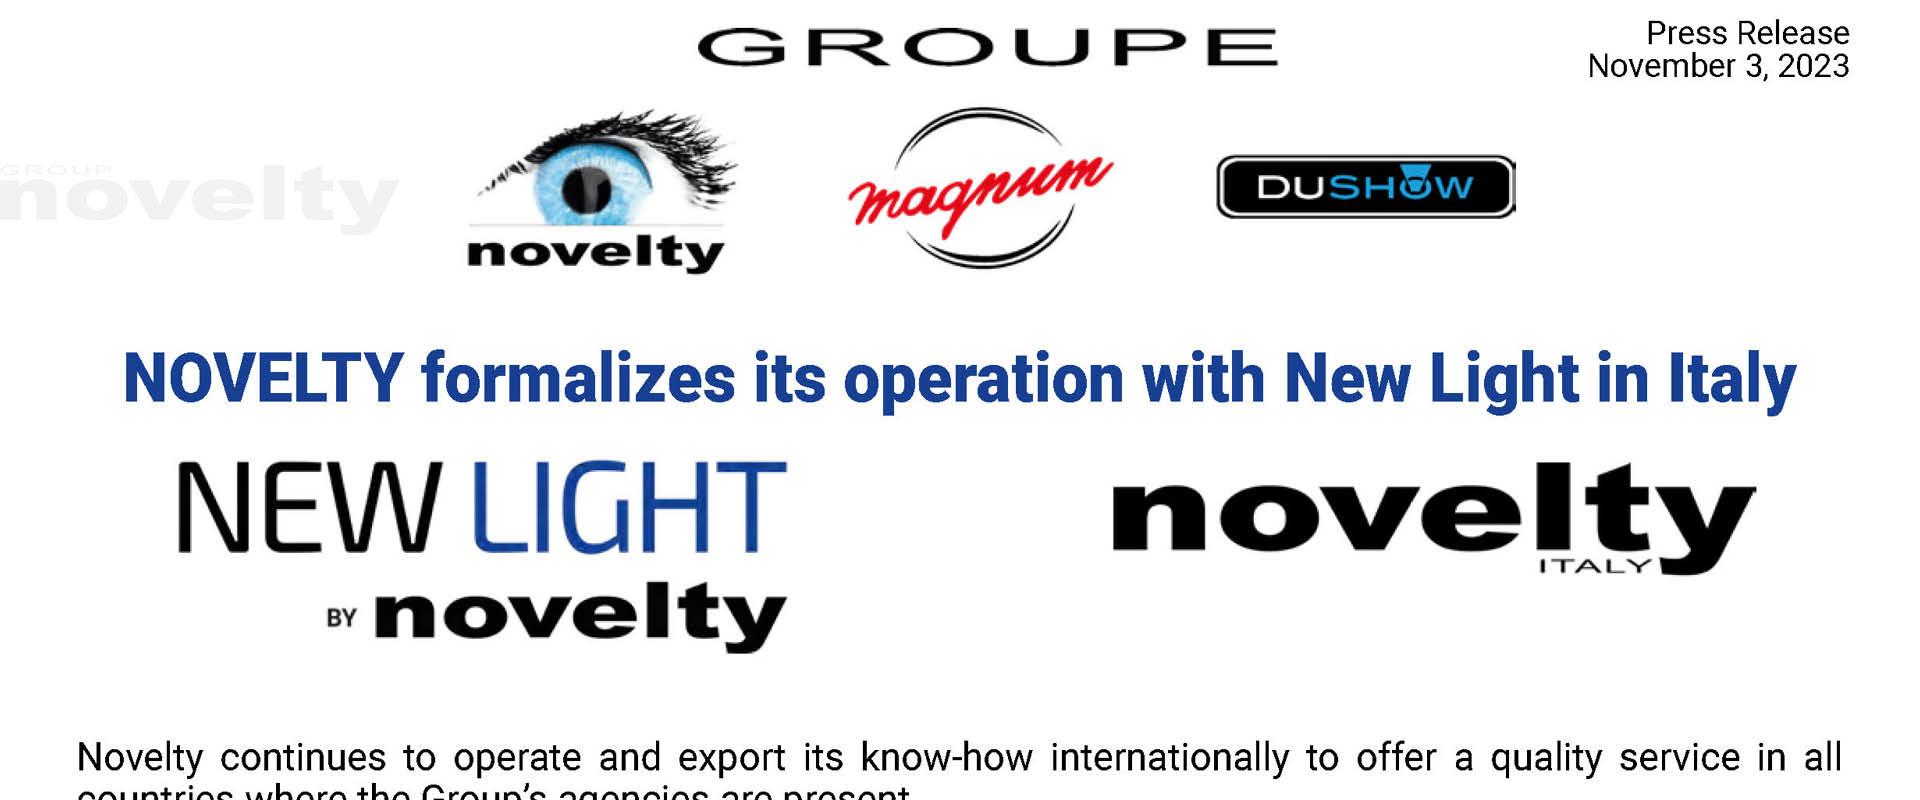 Visuel NOVELTY formalizes its operation with New Light in Italy